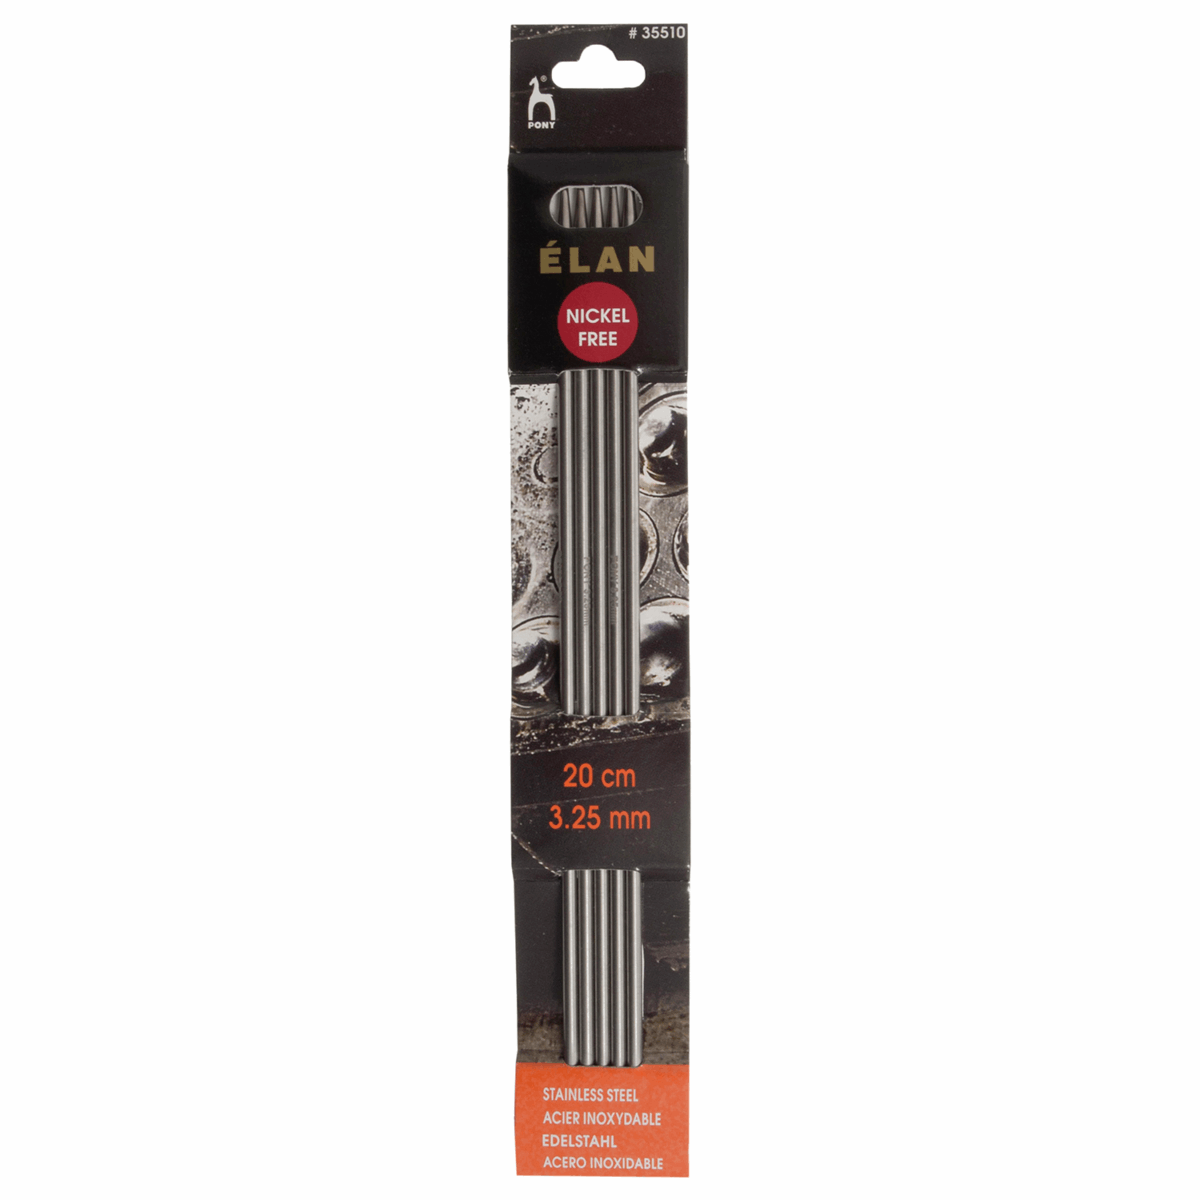 PONY 'Elan' Double-Ended Stainless Steel Knitting Pins - 20cm x 3.25mm (Set of 5)